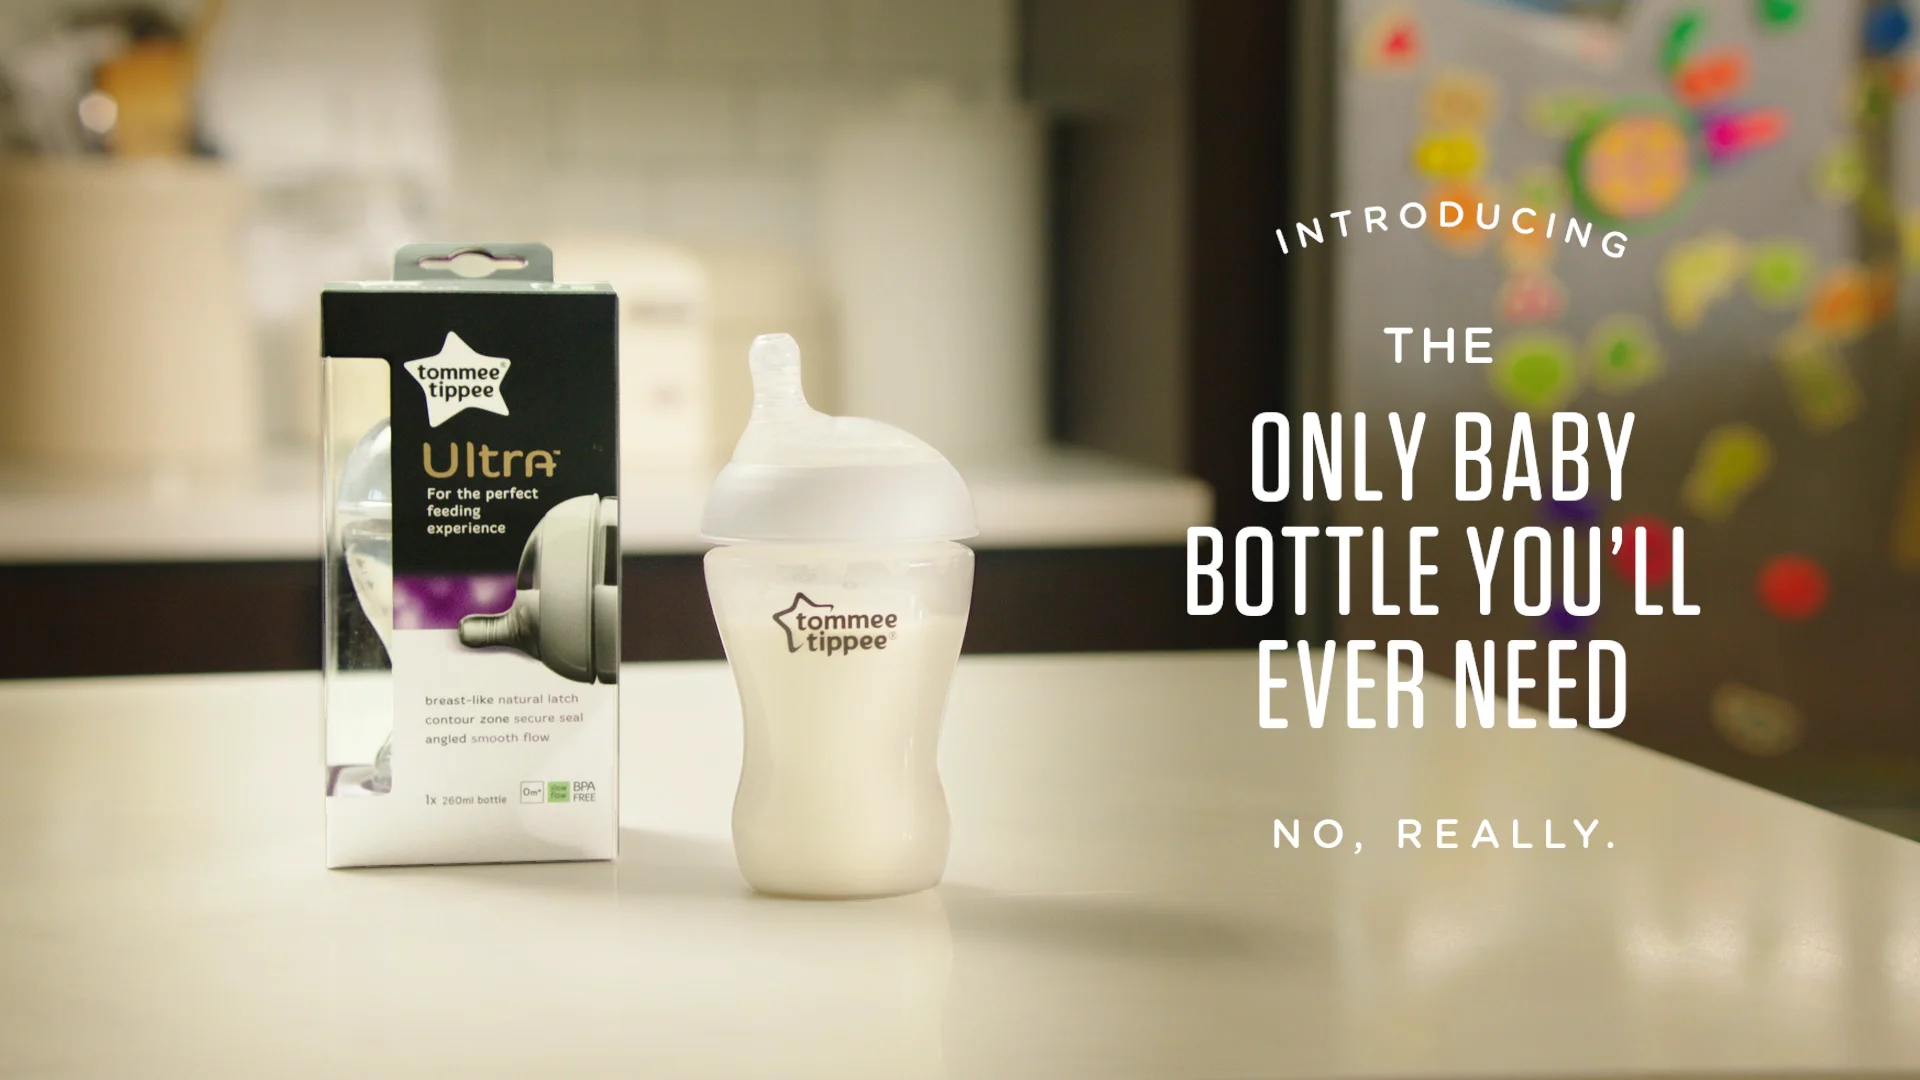 Tommee Tippee Preparing and Advanced Anti-colic Bottle on Vimeo